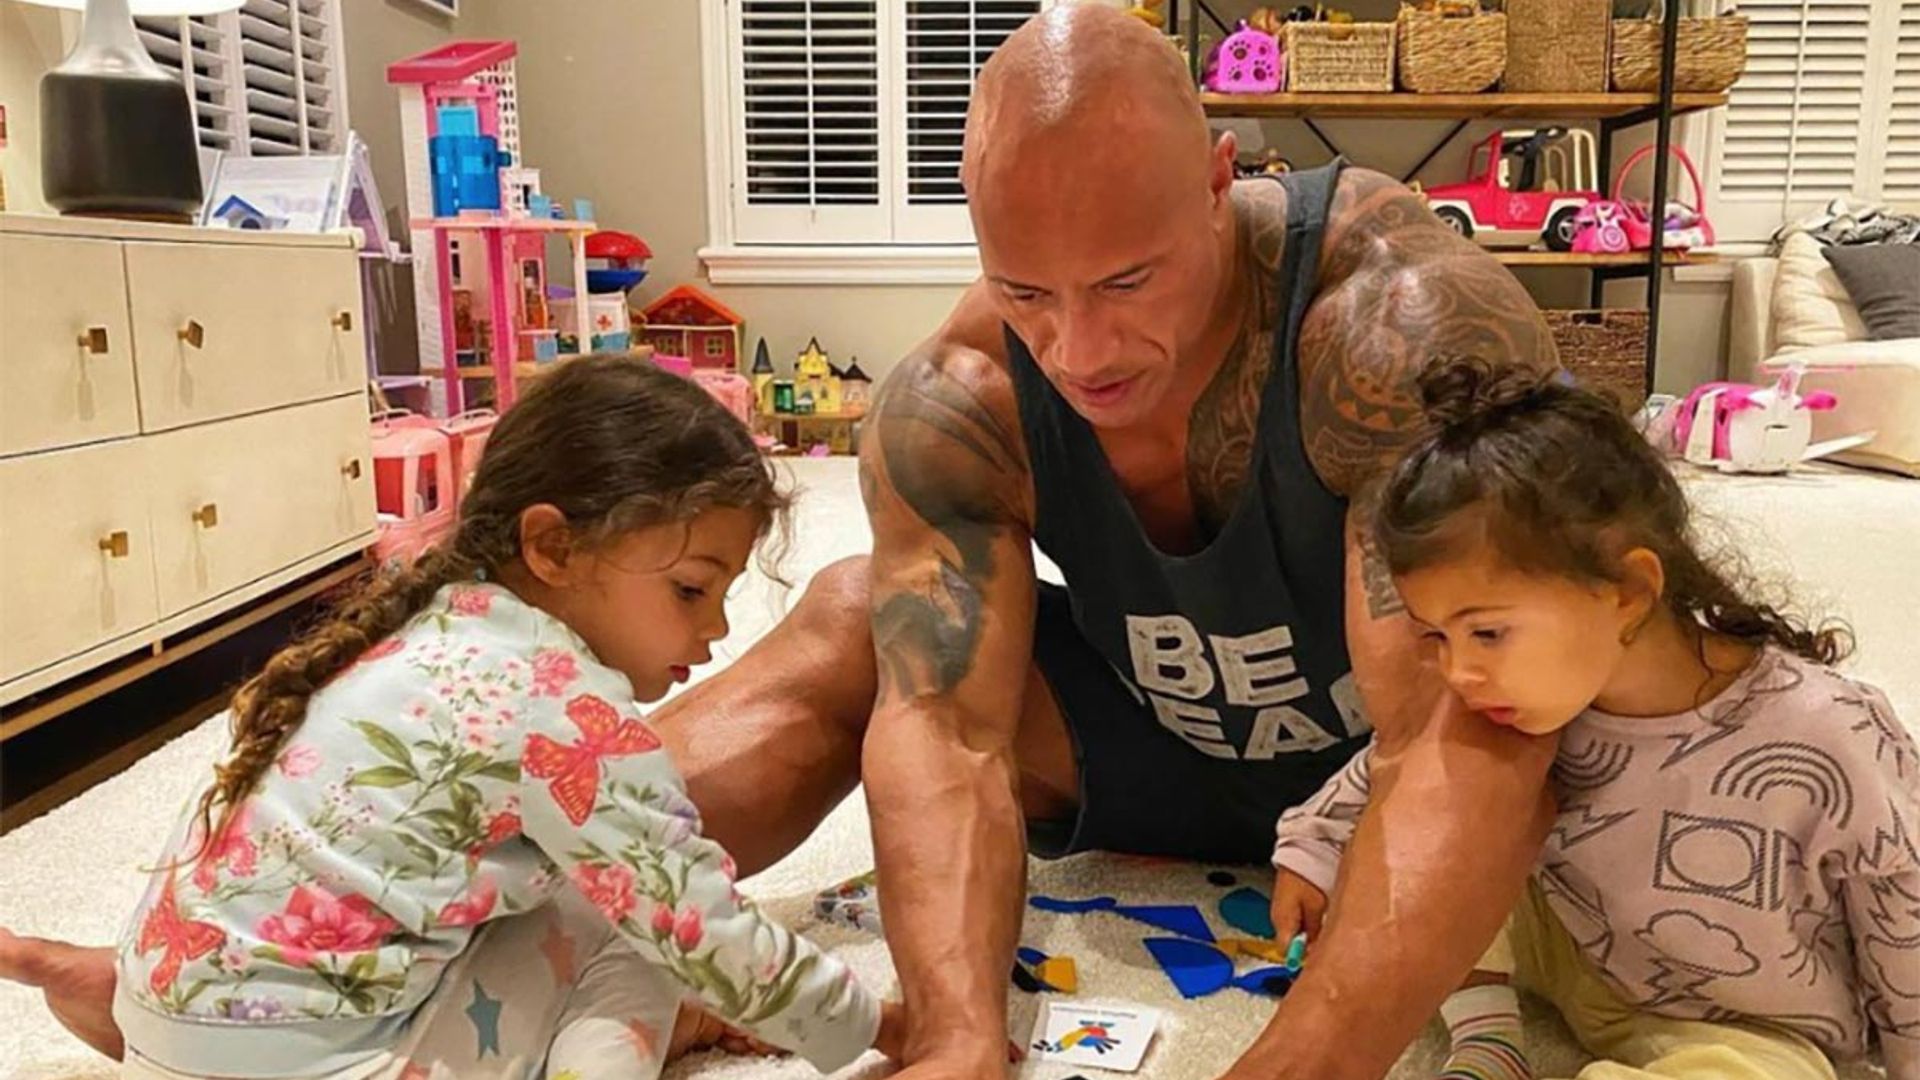 Dwayne The Rock Johnson playing with Barbie is the best picture you'll see today